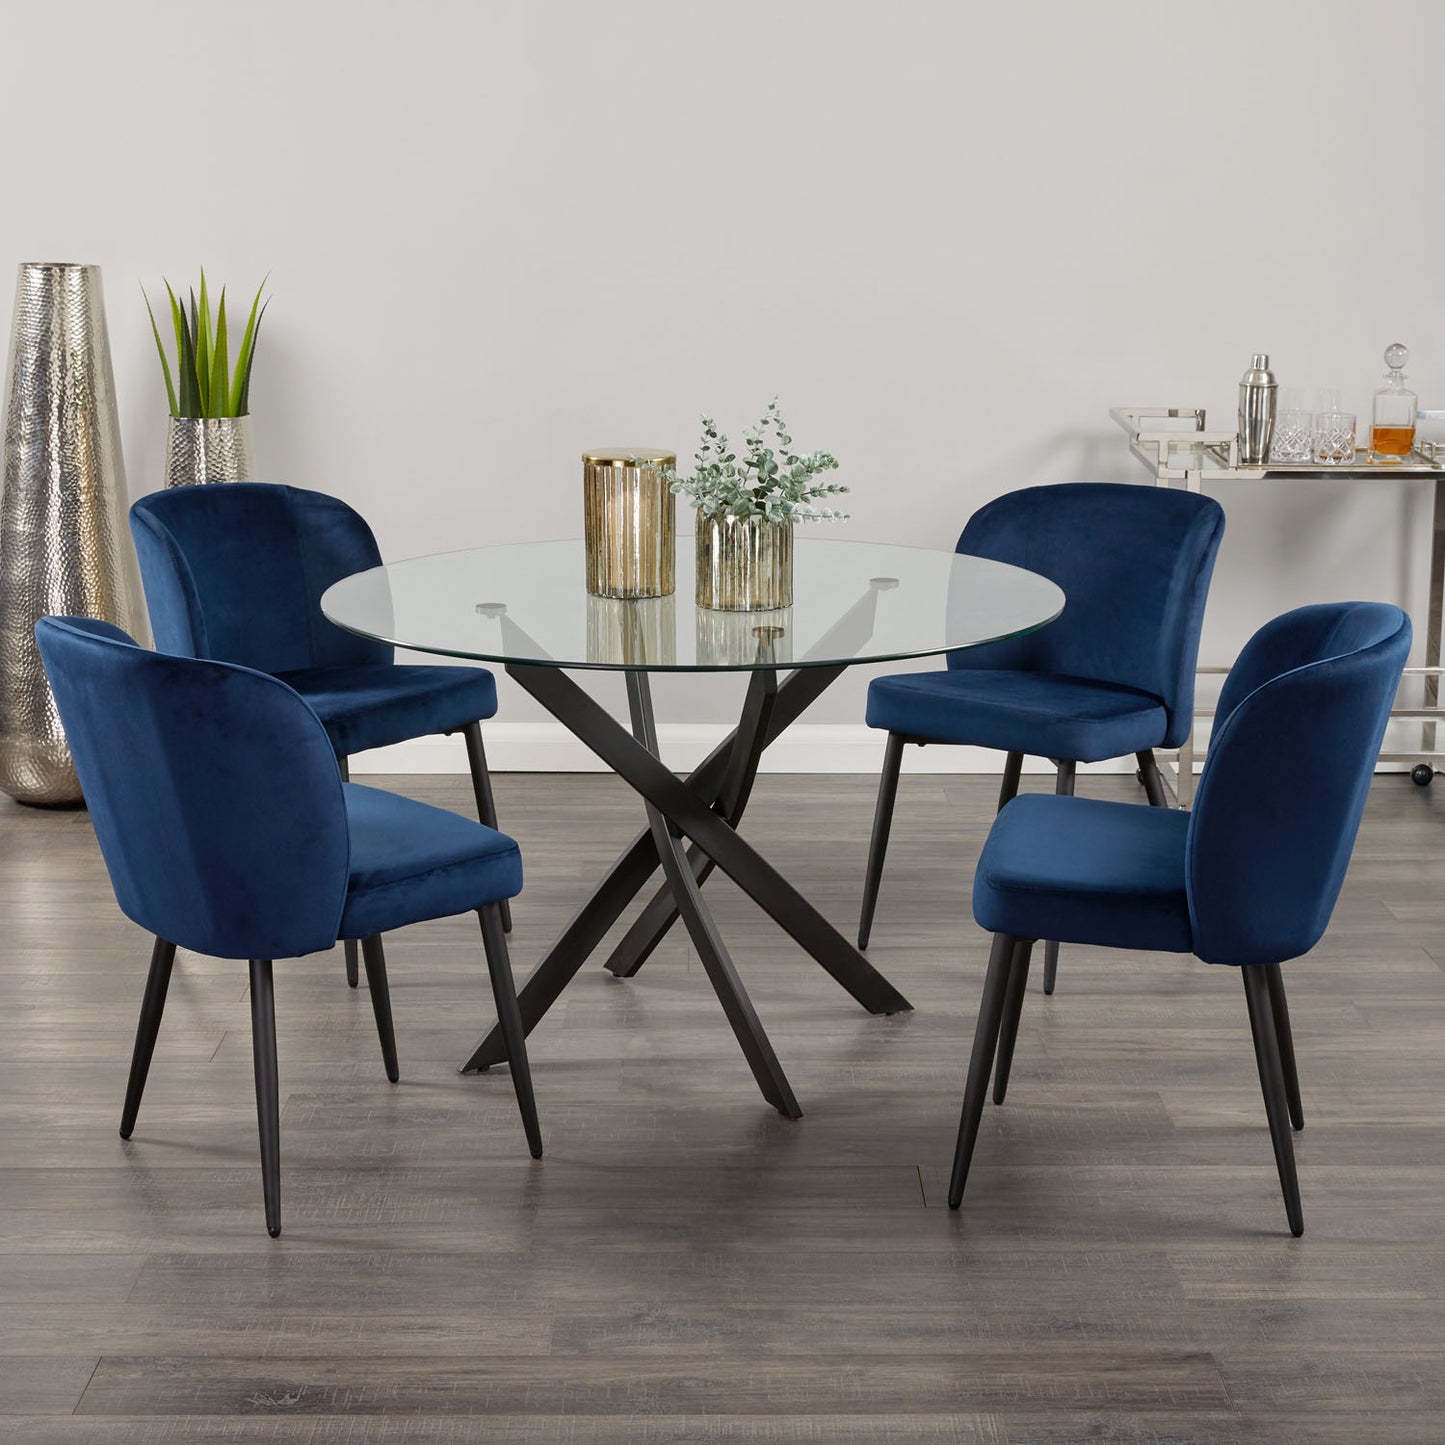 Collection of Dining Table and Chairs